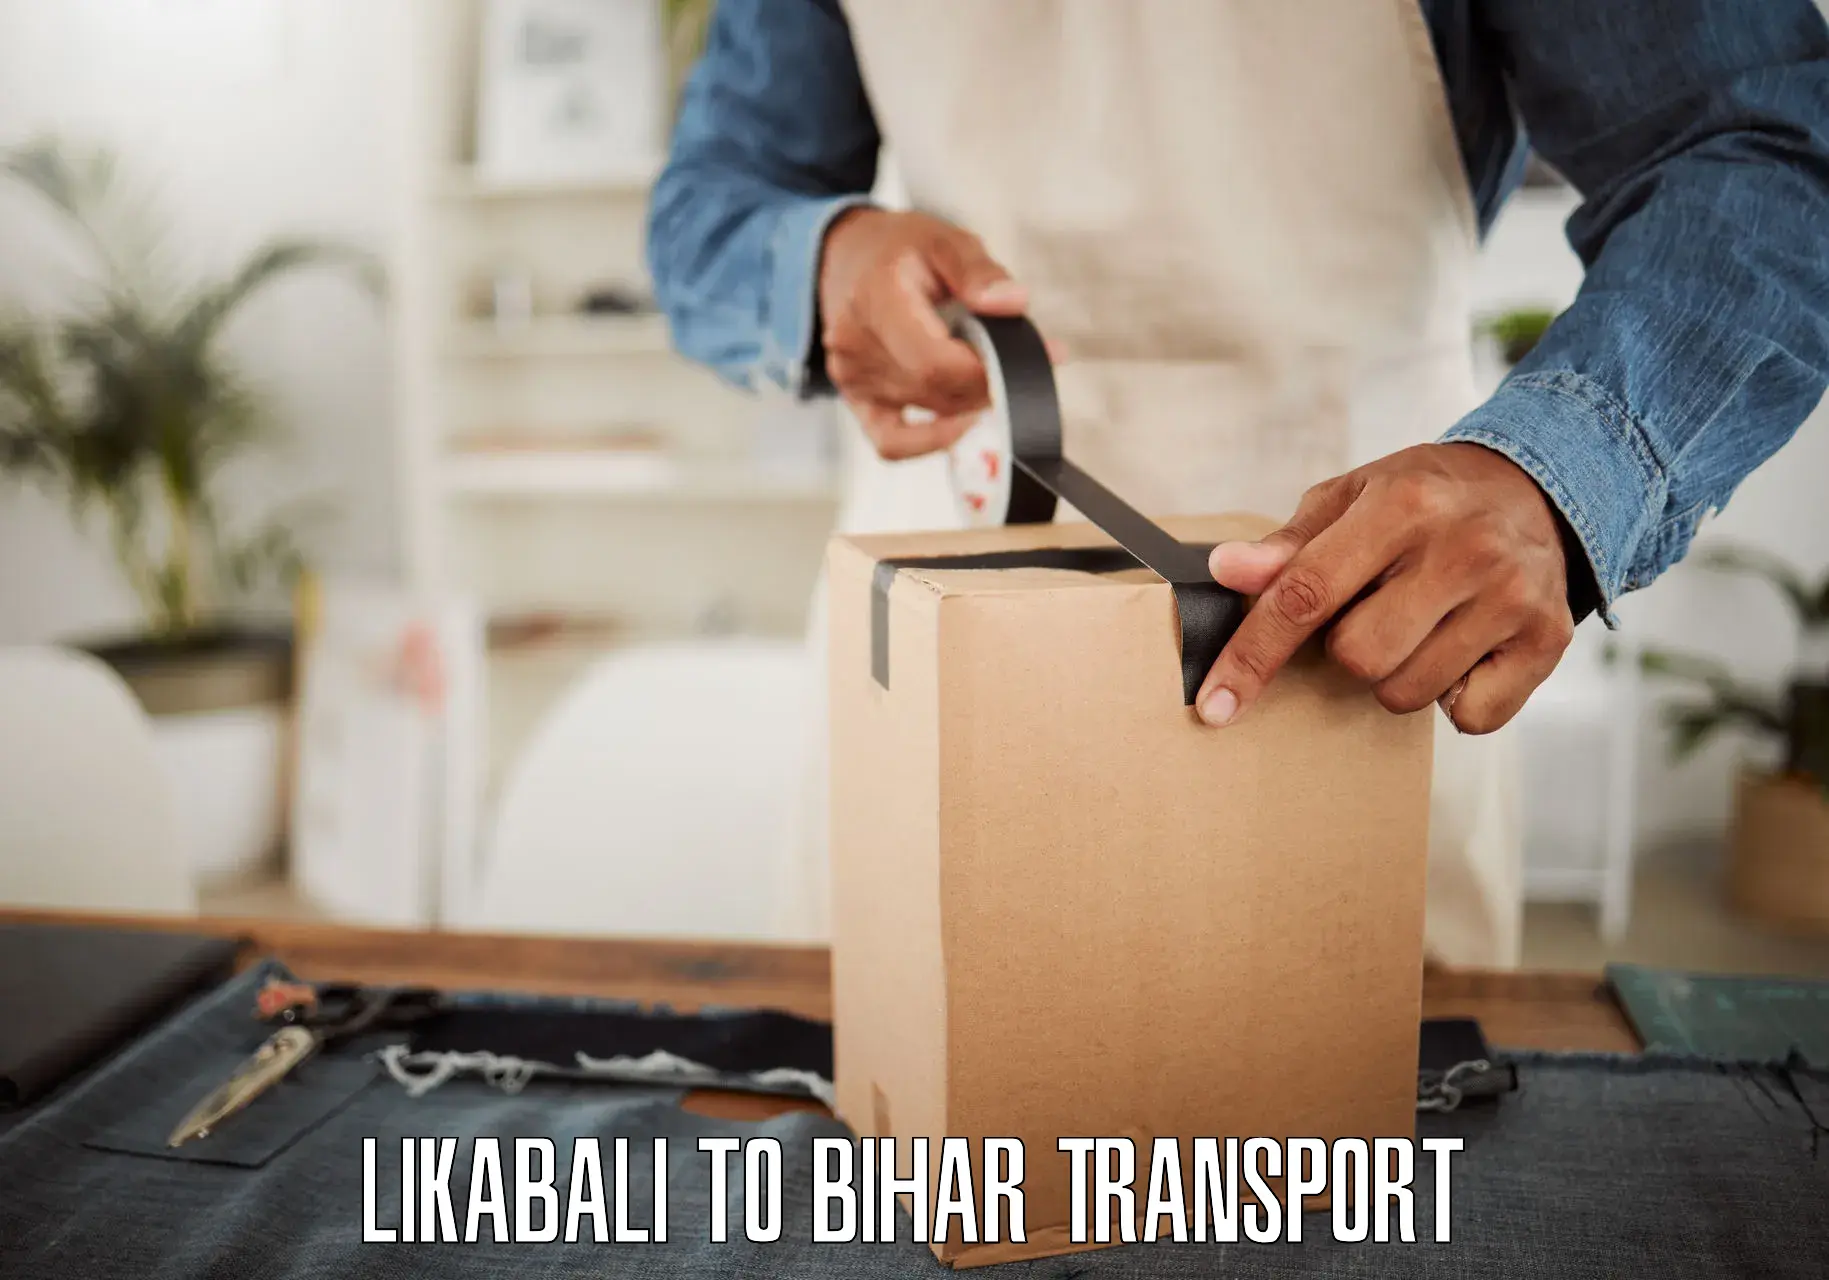 Container transport service Likabali to Rusera